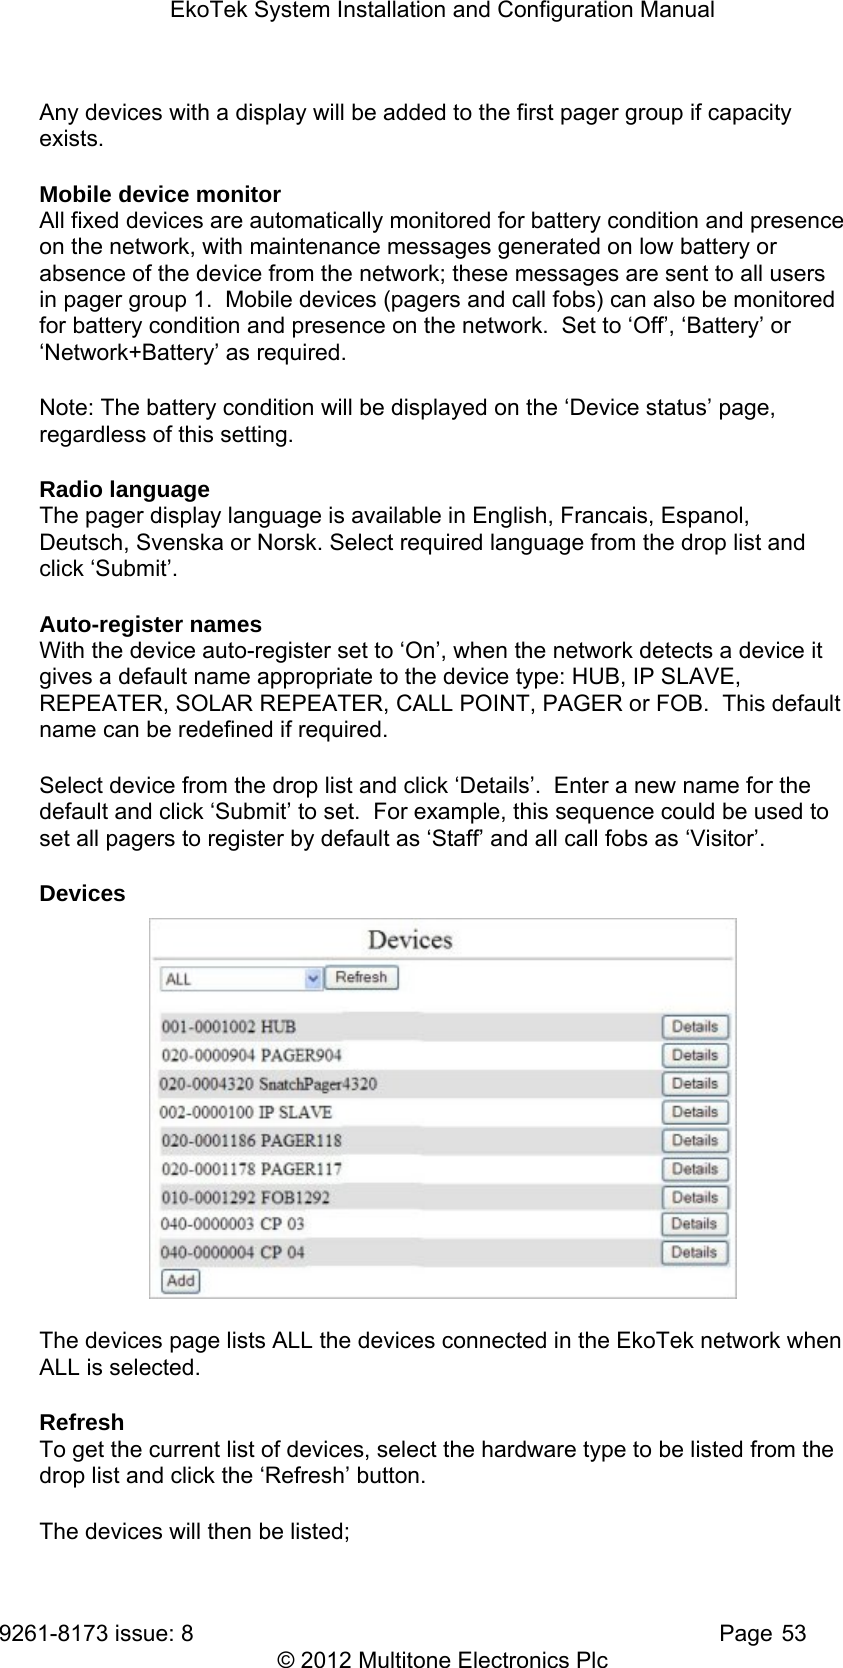 EkoTek System Installation and Configuration Manual 9261-8173 issue: 8   Page 53 © 2012 Multitone Electronics Plc Any devices with a display will be added to the first pager group if capacity exists. Mobile device monitor All fixed devices are automatically monitored for battery condition and presence on the network, with maintenance messages generated on low battery or absence of the device from the network; these messages are sent to all users in pager group 1.  Mobile devices (pagers and call fobs) can also be monitored for battery condition and presence on the network.  Set to ‘Off’, ‘Battery’ or ‘Network+Battery’ as required. Note: The battery condition will be displayed on the ‘Device status’ page, regardless of this setting. Radio language The pager display language is available in English, Francais, Espanol, Deutsch, Svenska or Norsk. Select required language from the drop list and click ‘Submit’. Auto-register names With the device auto-register set to ‘On’, when the network detects a device it gives a default name appropriate to the device type: HUB, IP SLAVE, REPEATER, SOLAR REPEATER, CALL POINT, PAGER or FOB.  This default name can be redefined if required. Select device from the drop list and click ‘Details’.  Enter a new name for the default and click ‘Submit’ to set.  For example, this sequence could be used to set all pagers to register by default as ‘Staff’ and all call fobs as ‘Visitor’. Devices  The devices page lists ALL the devices connected in the EkoTek network when ALL is selected. Refresh To get the current list of devices, select the hardware type to be listed from the drop list and click the ‘Refresh’ button. The devices will then be listed;  